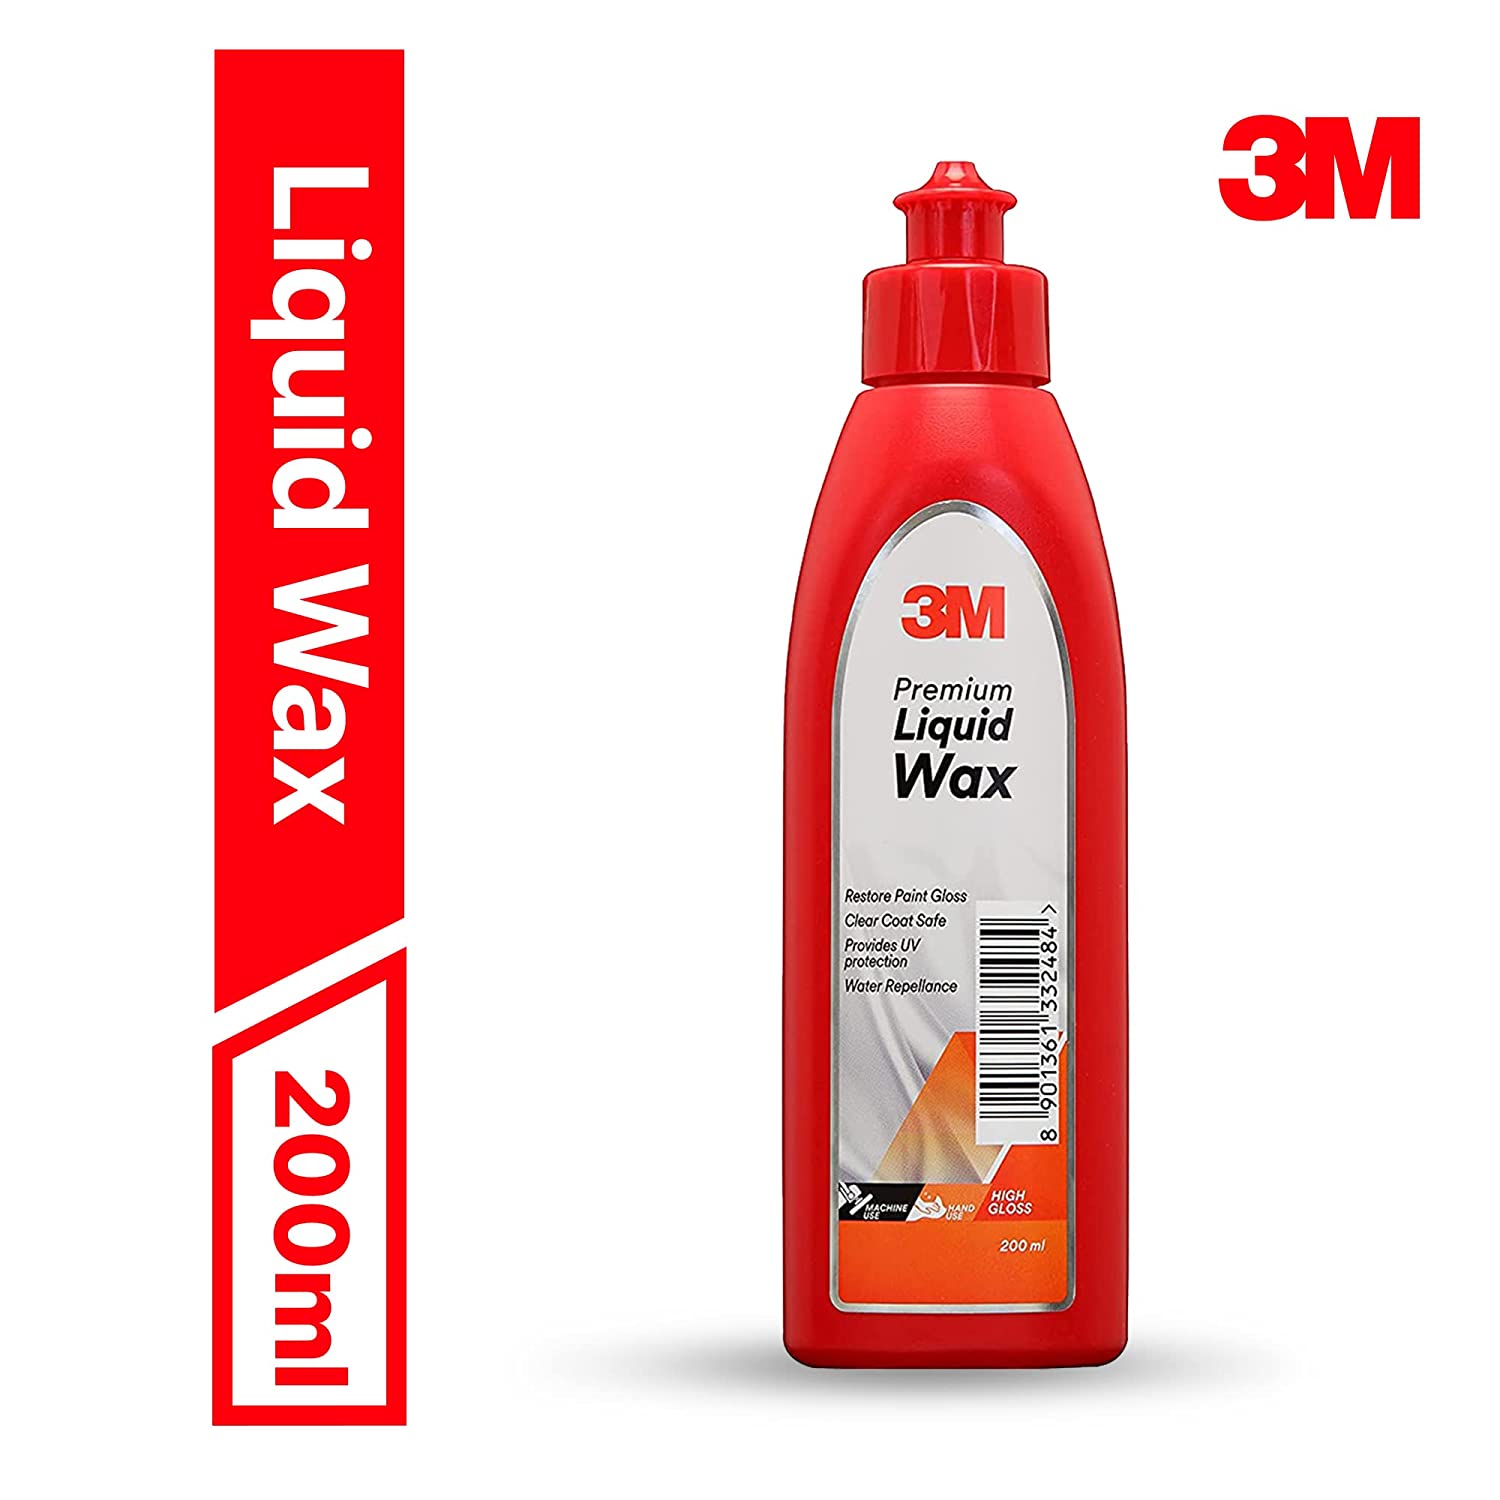 dr.3m CAR WAX POLISH 5ltr. Combo Price in India - Buy dr.3m CAR